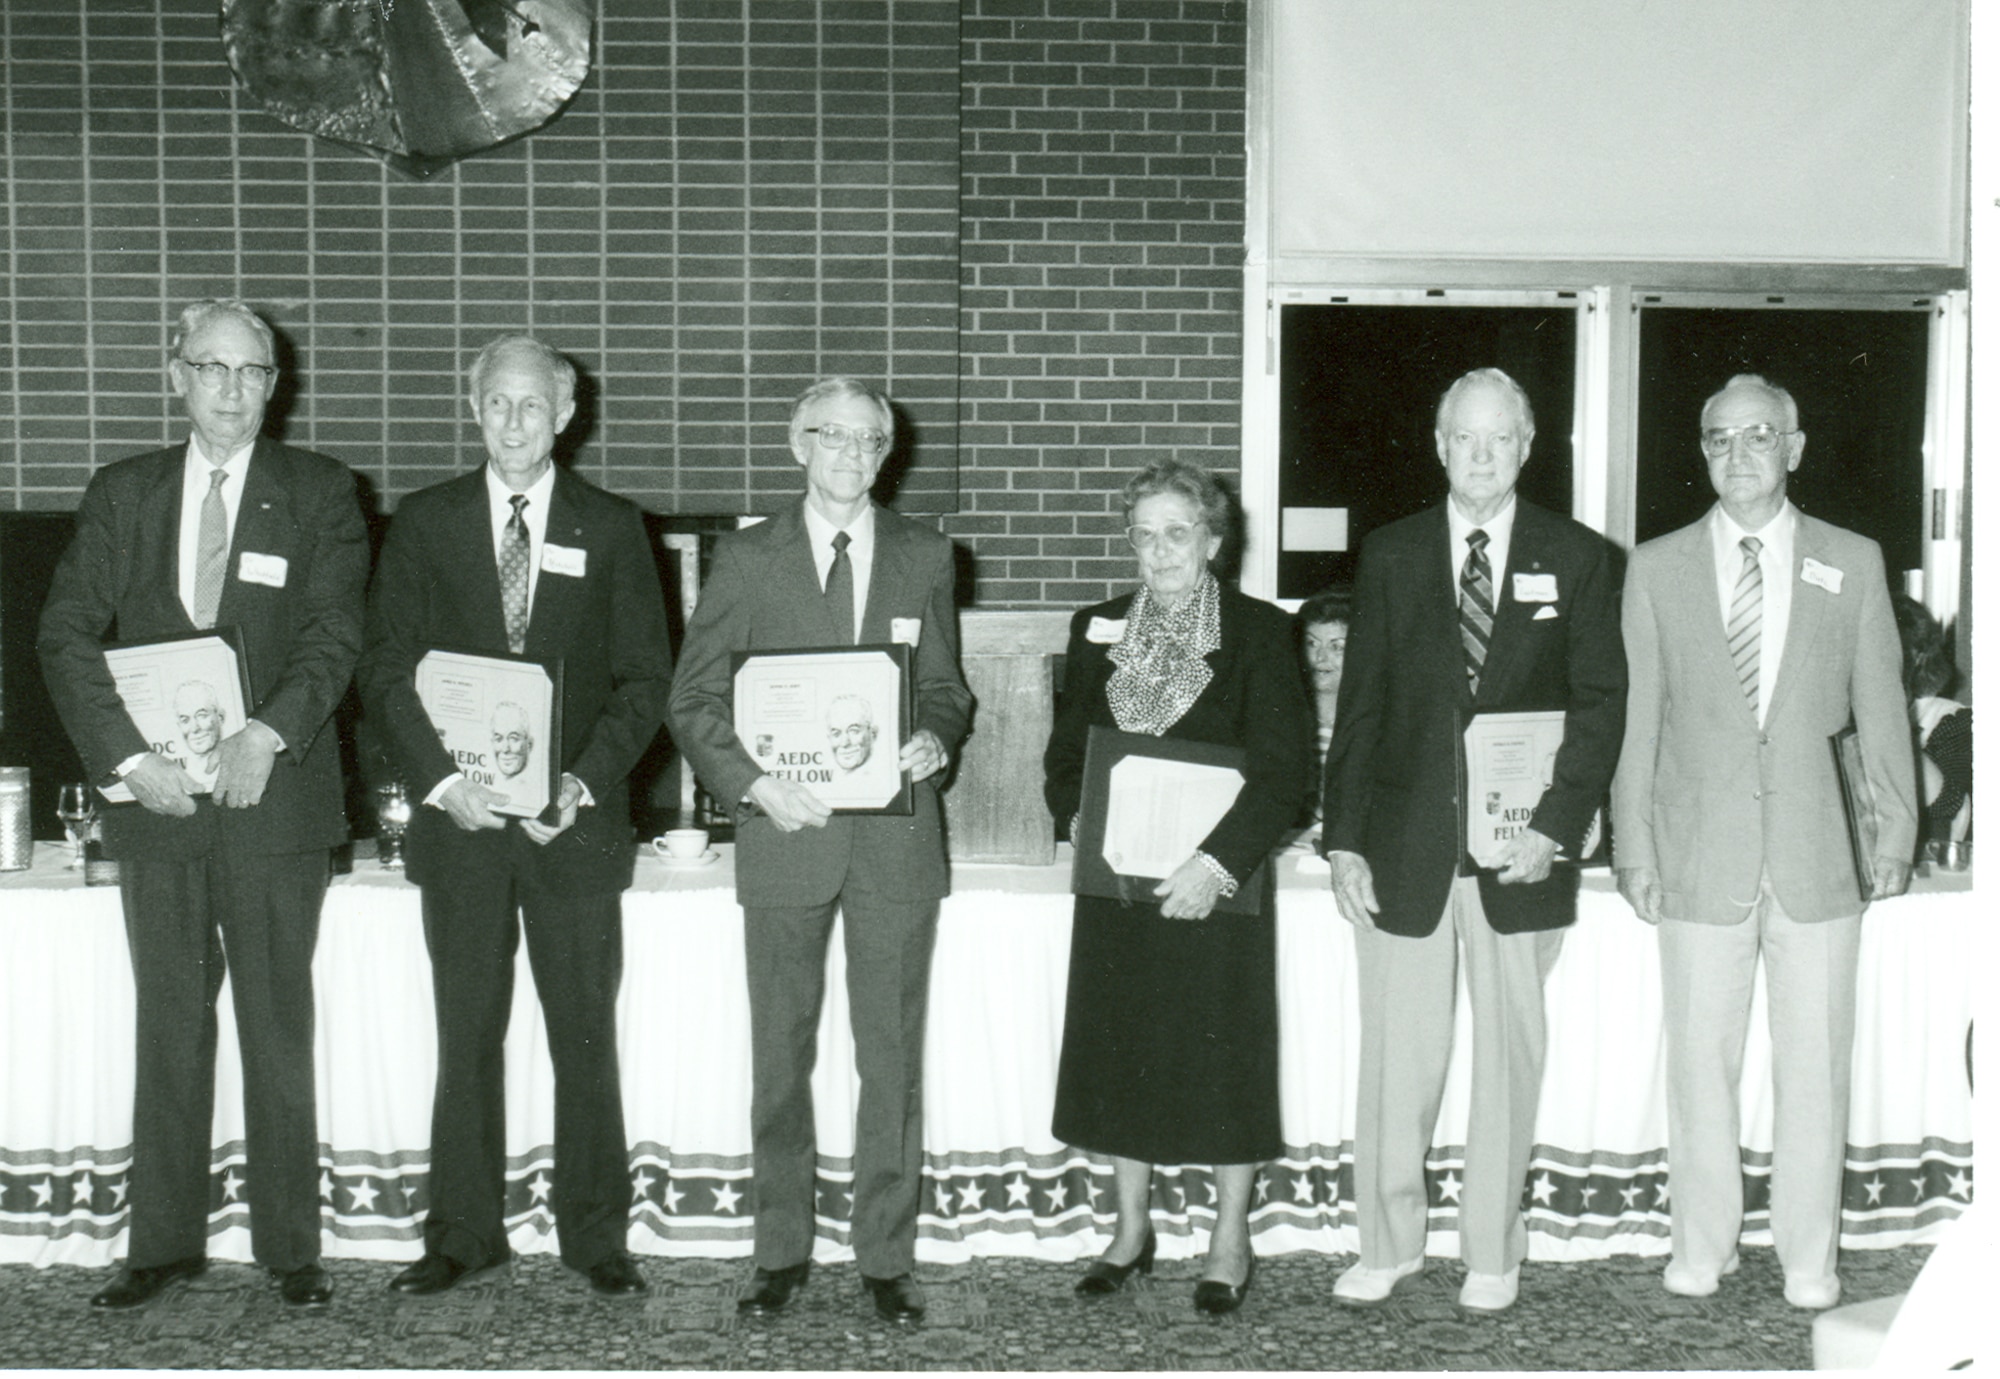 Dr. James Mitchell, second from left, is honored as an Arnold Engineering Development Complex Fellow in 1989. Mitchell was one of six scientists inducted in this inaugural Fellows class for his contributions to aerospace ground testing. Also pictured from left are Dr. Jack D. Whitfield, Dennis D. Horn, Hertha Goethert (on behalf of her late husband Dr. Bernhard H. Goethert), Donald R. Eastman and Robert O. Dietz. (U.S. Air Force photo)